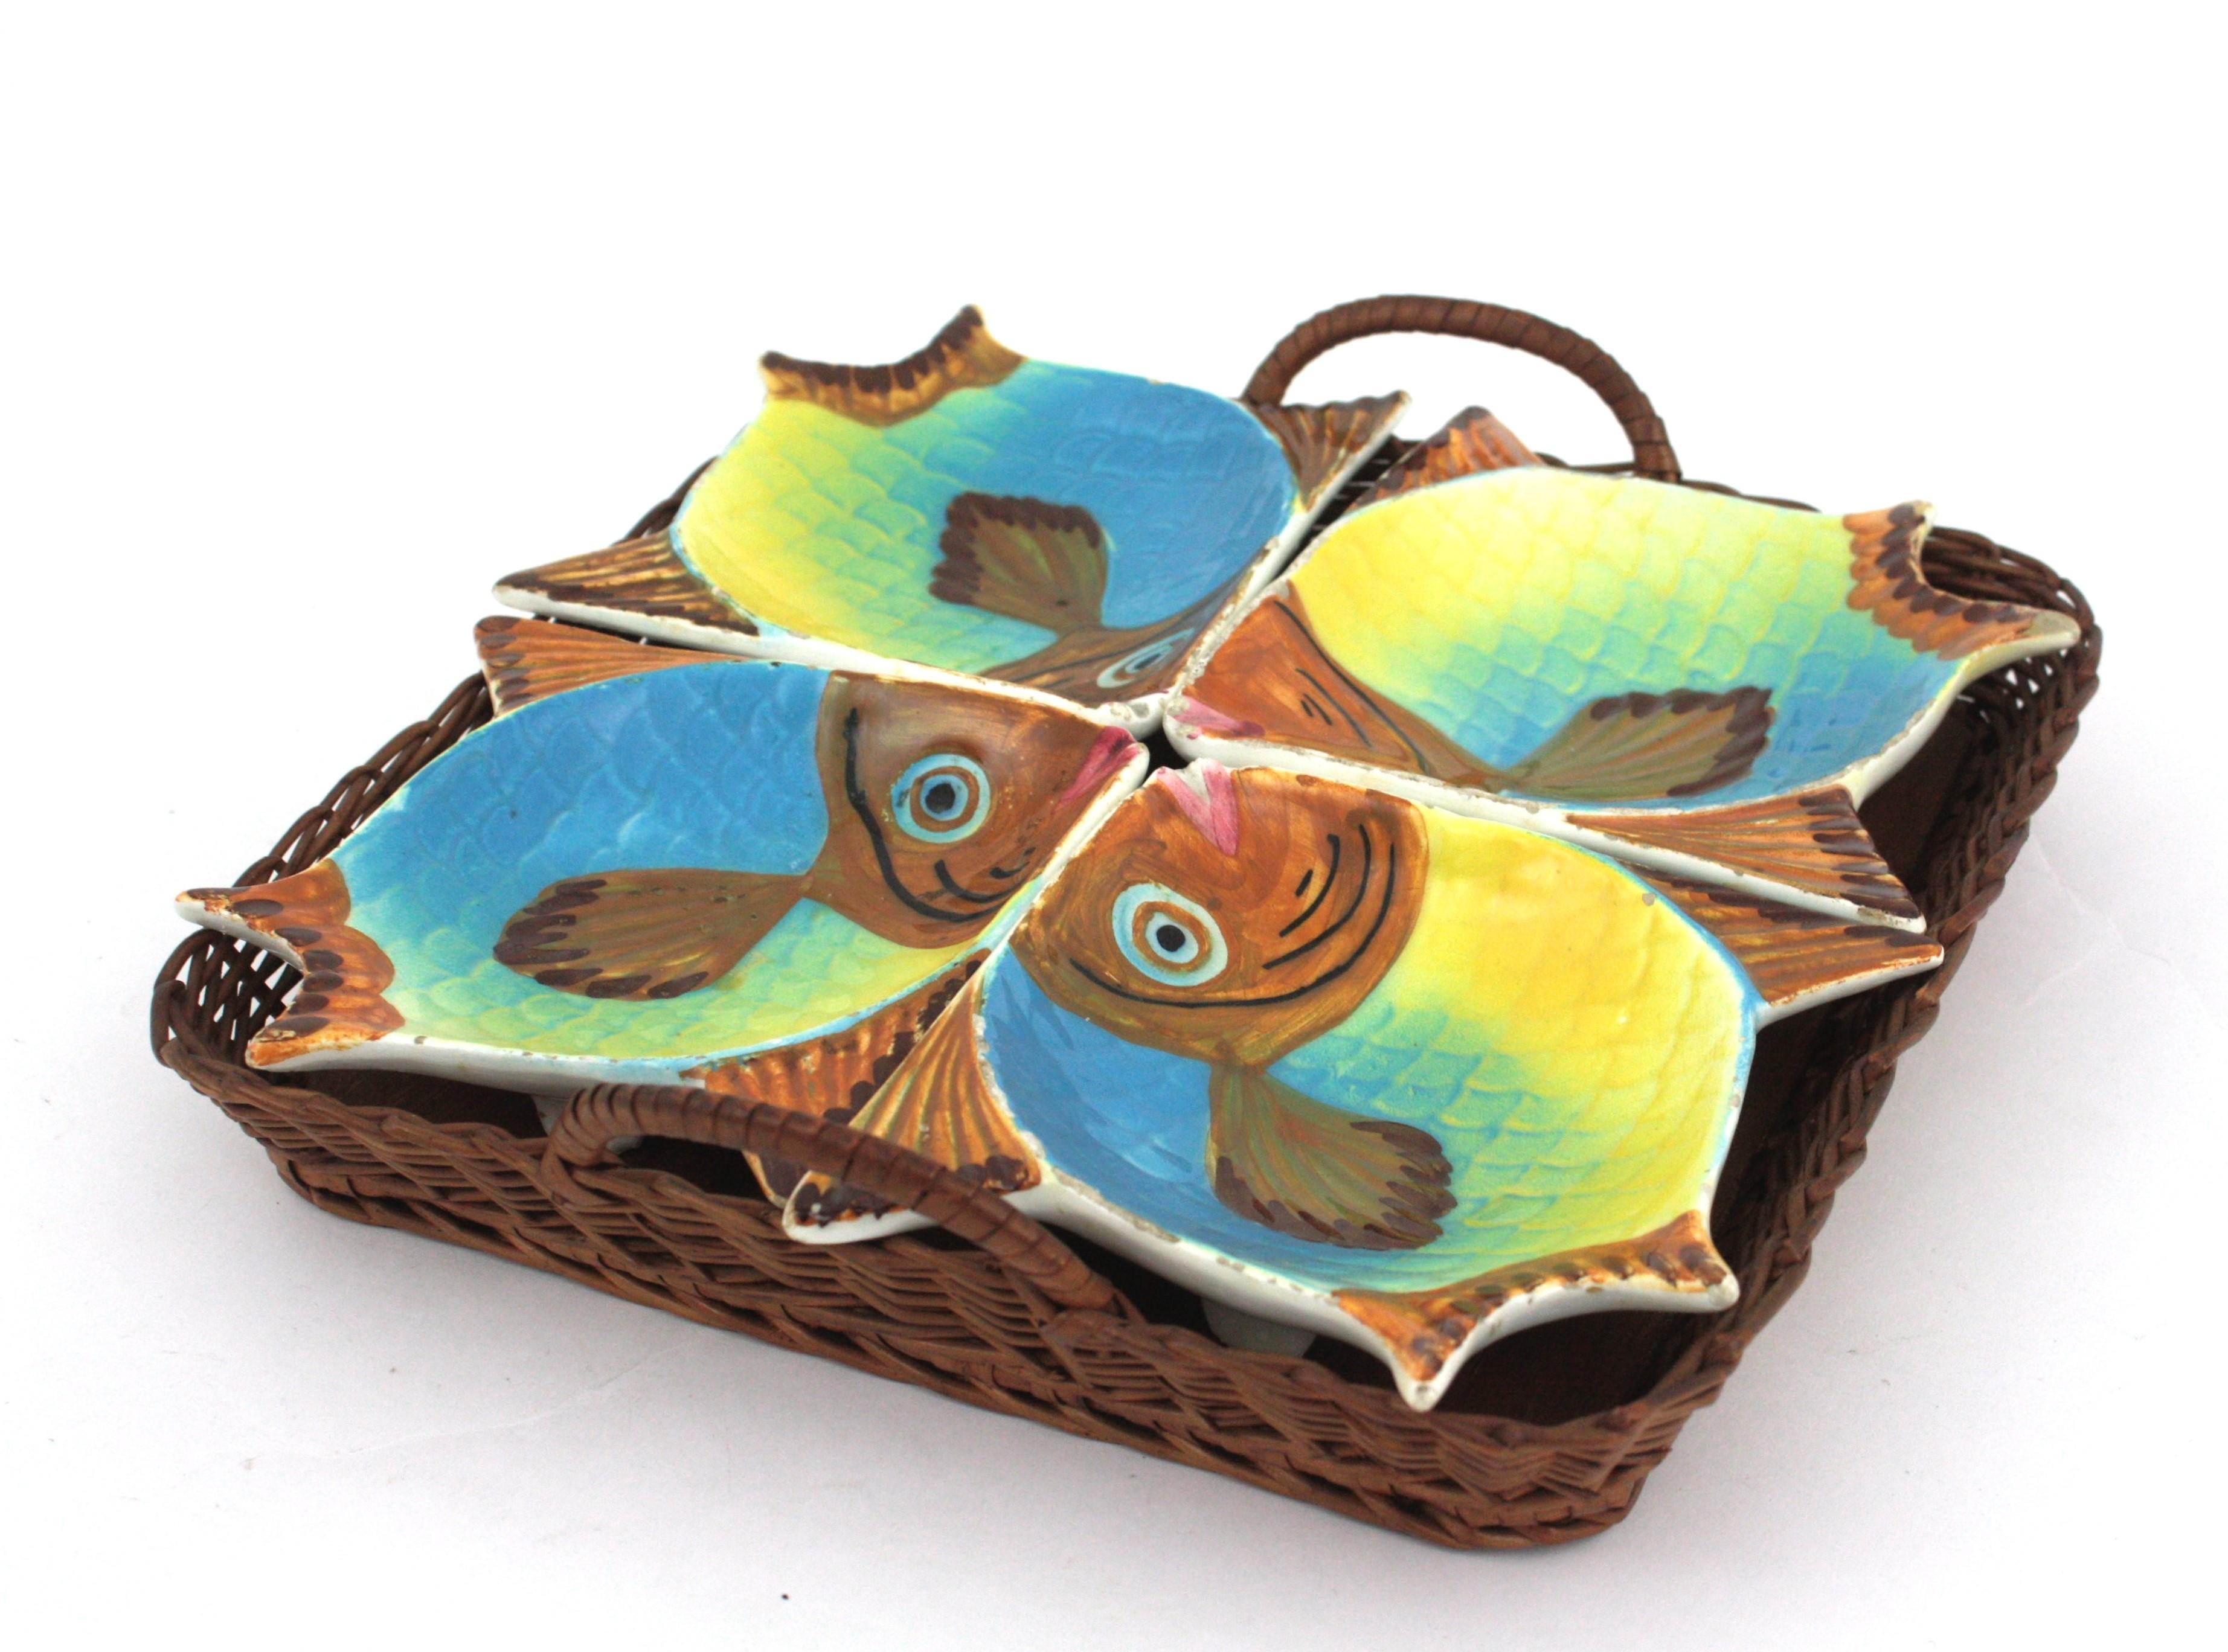 Spanish Ceramic Fish Bowls and Rattan Tray Snacks Set For Sale 1